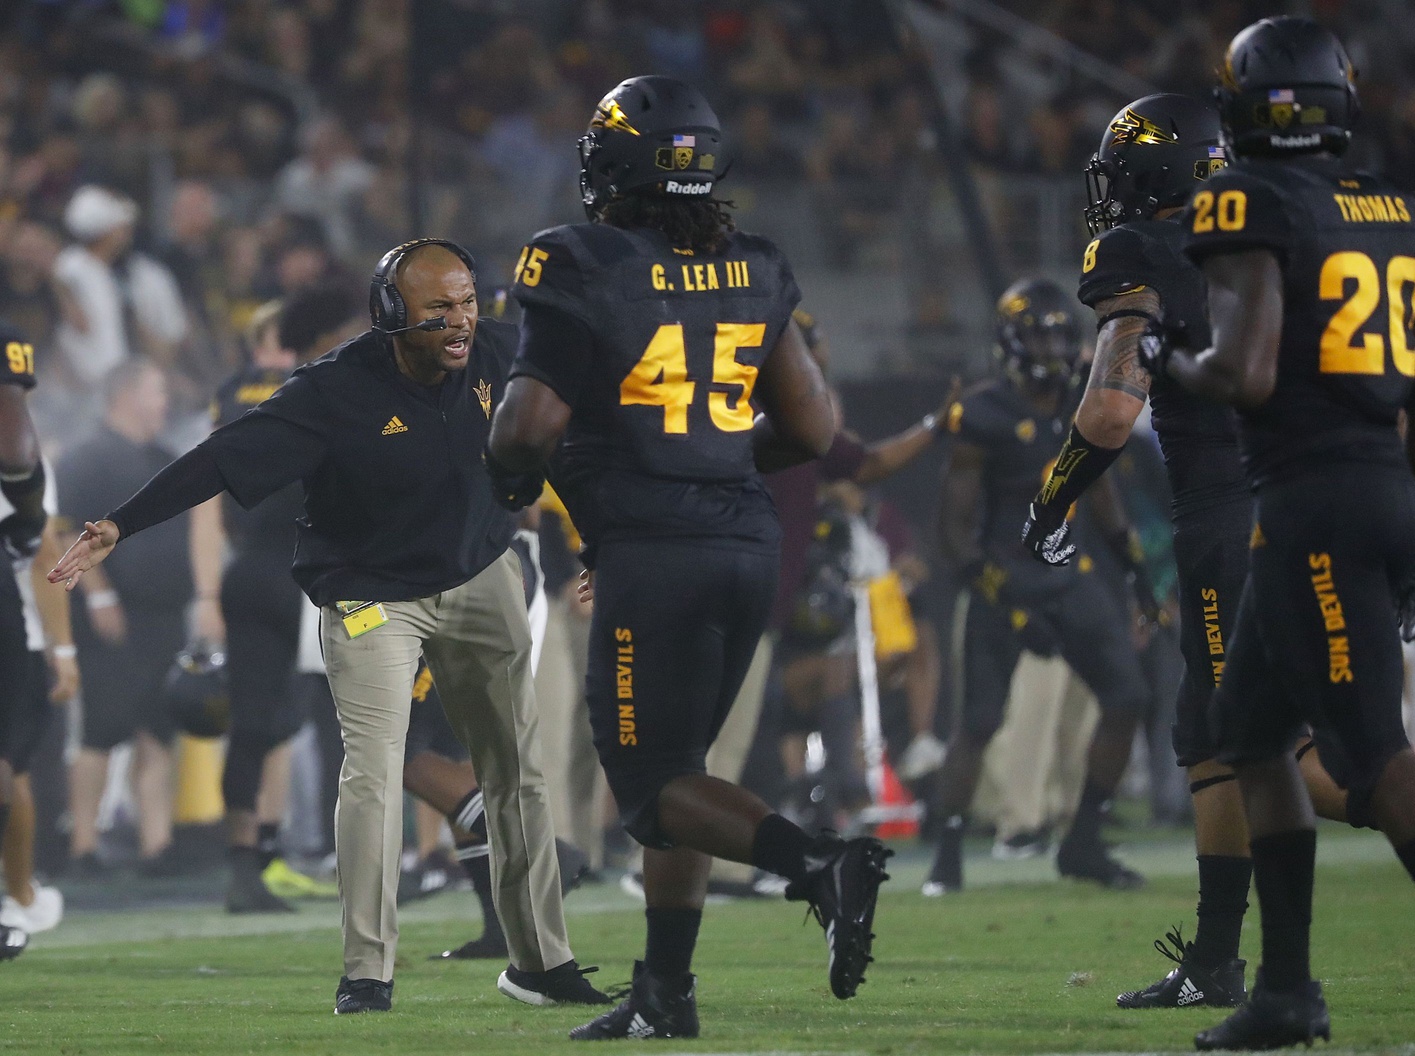 Arizona State's linebackers coach Antonio Pierce greets the defense after a stop against Michigan State.